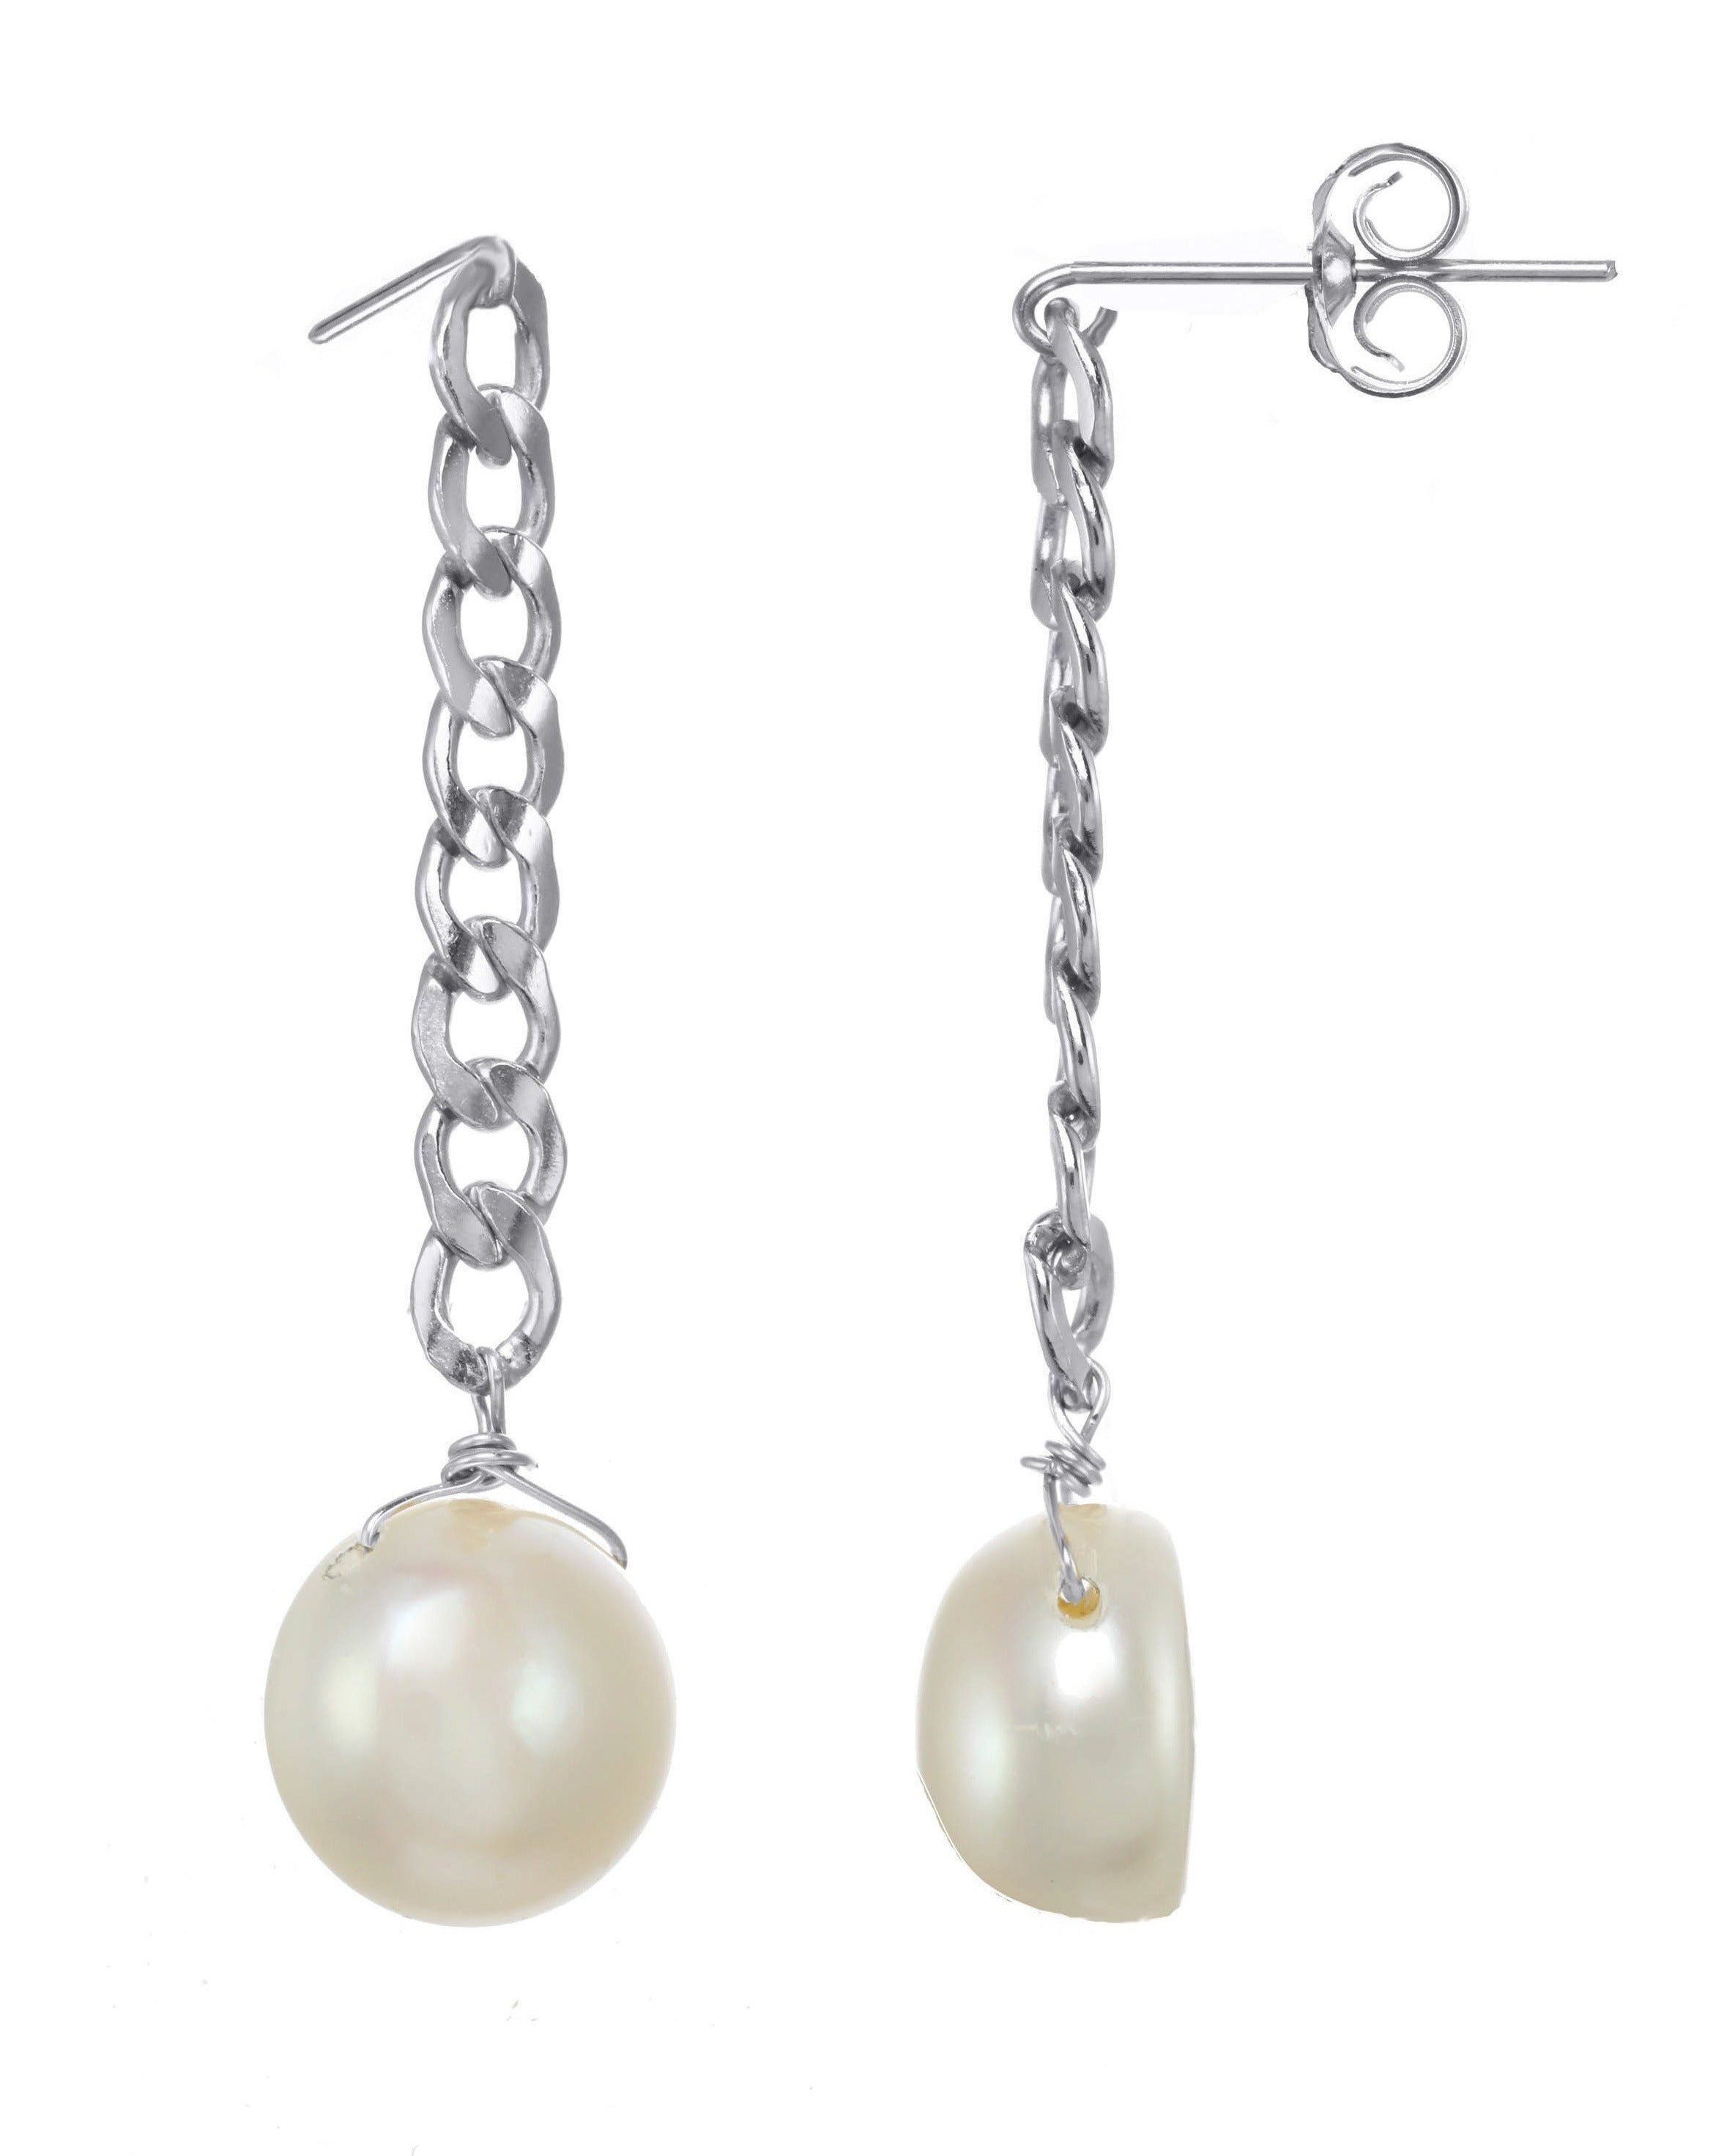 Aubrey Earrings by Kozakh. Chain style drop earrings in Sterling Silver with Freshwater Pearls. Earring drop length is 1.5 inches.